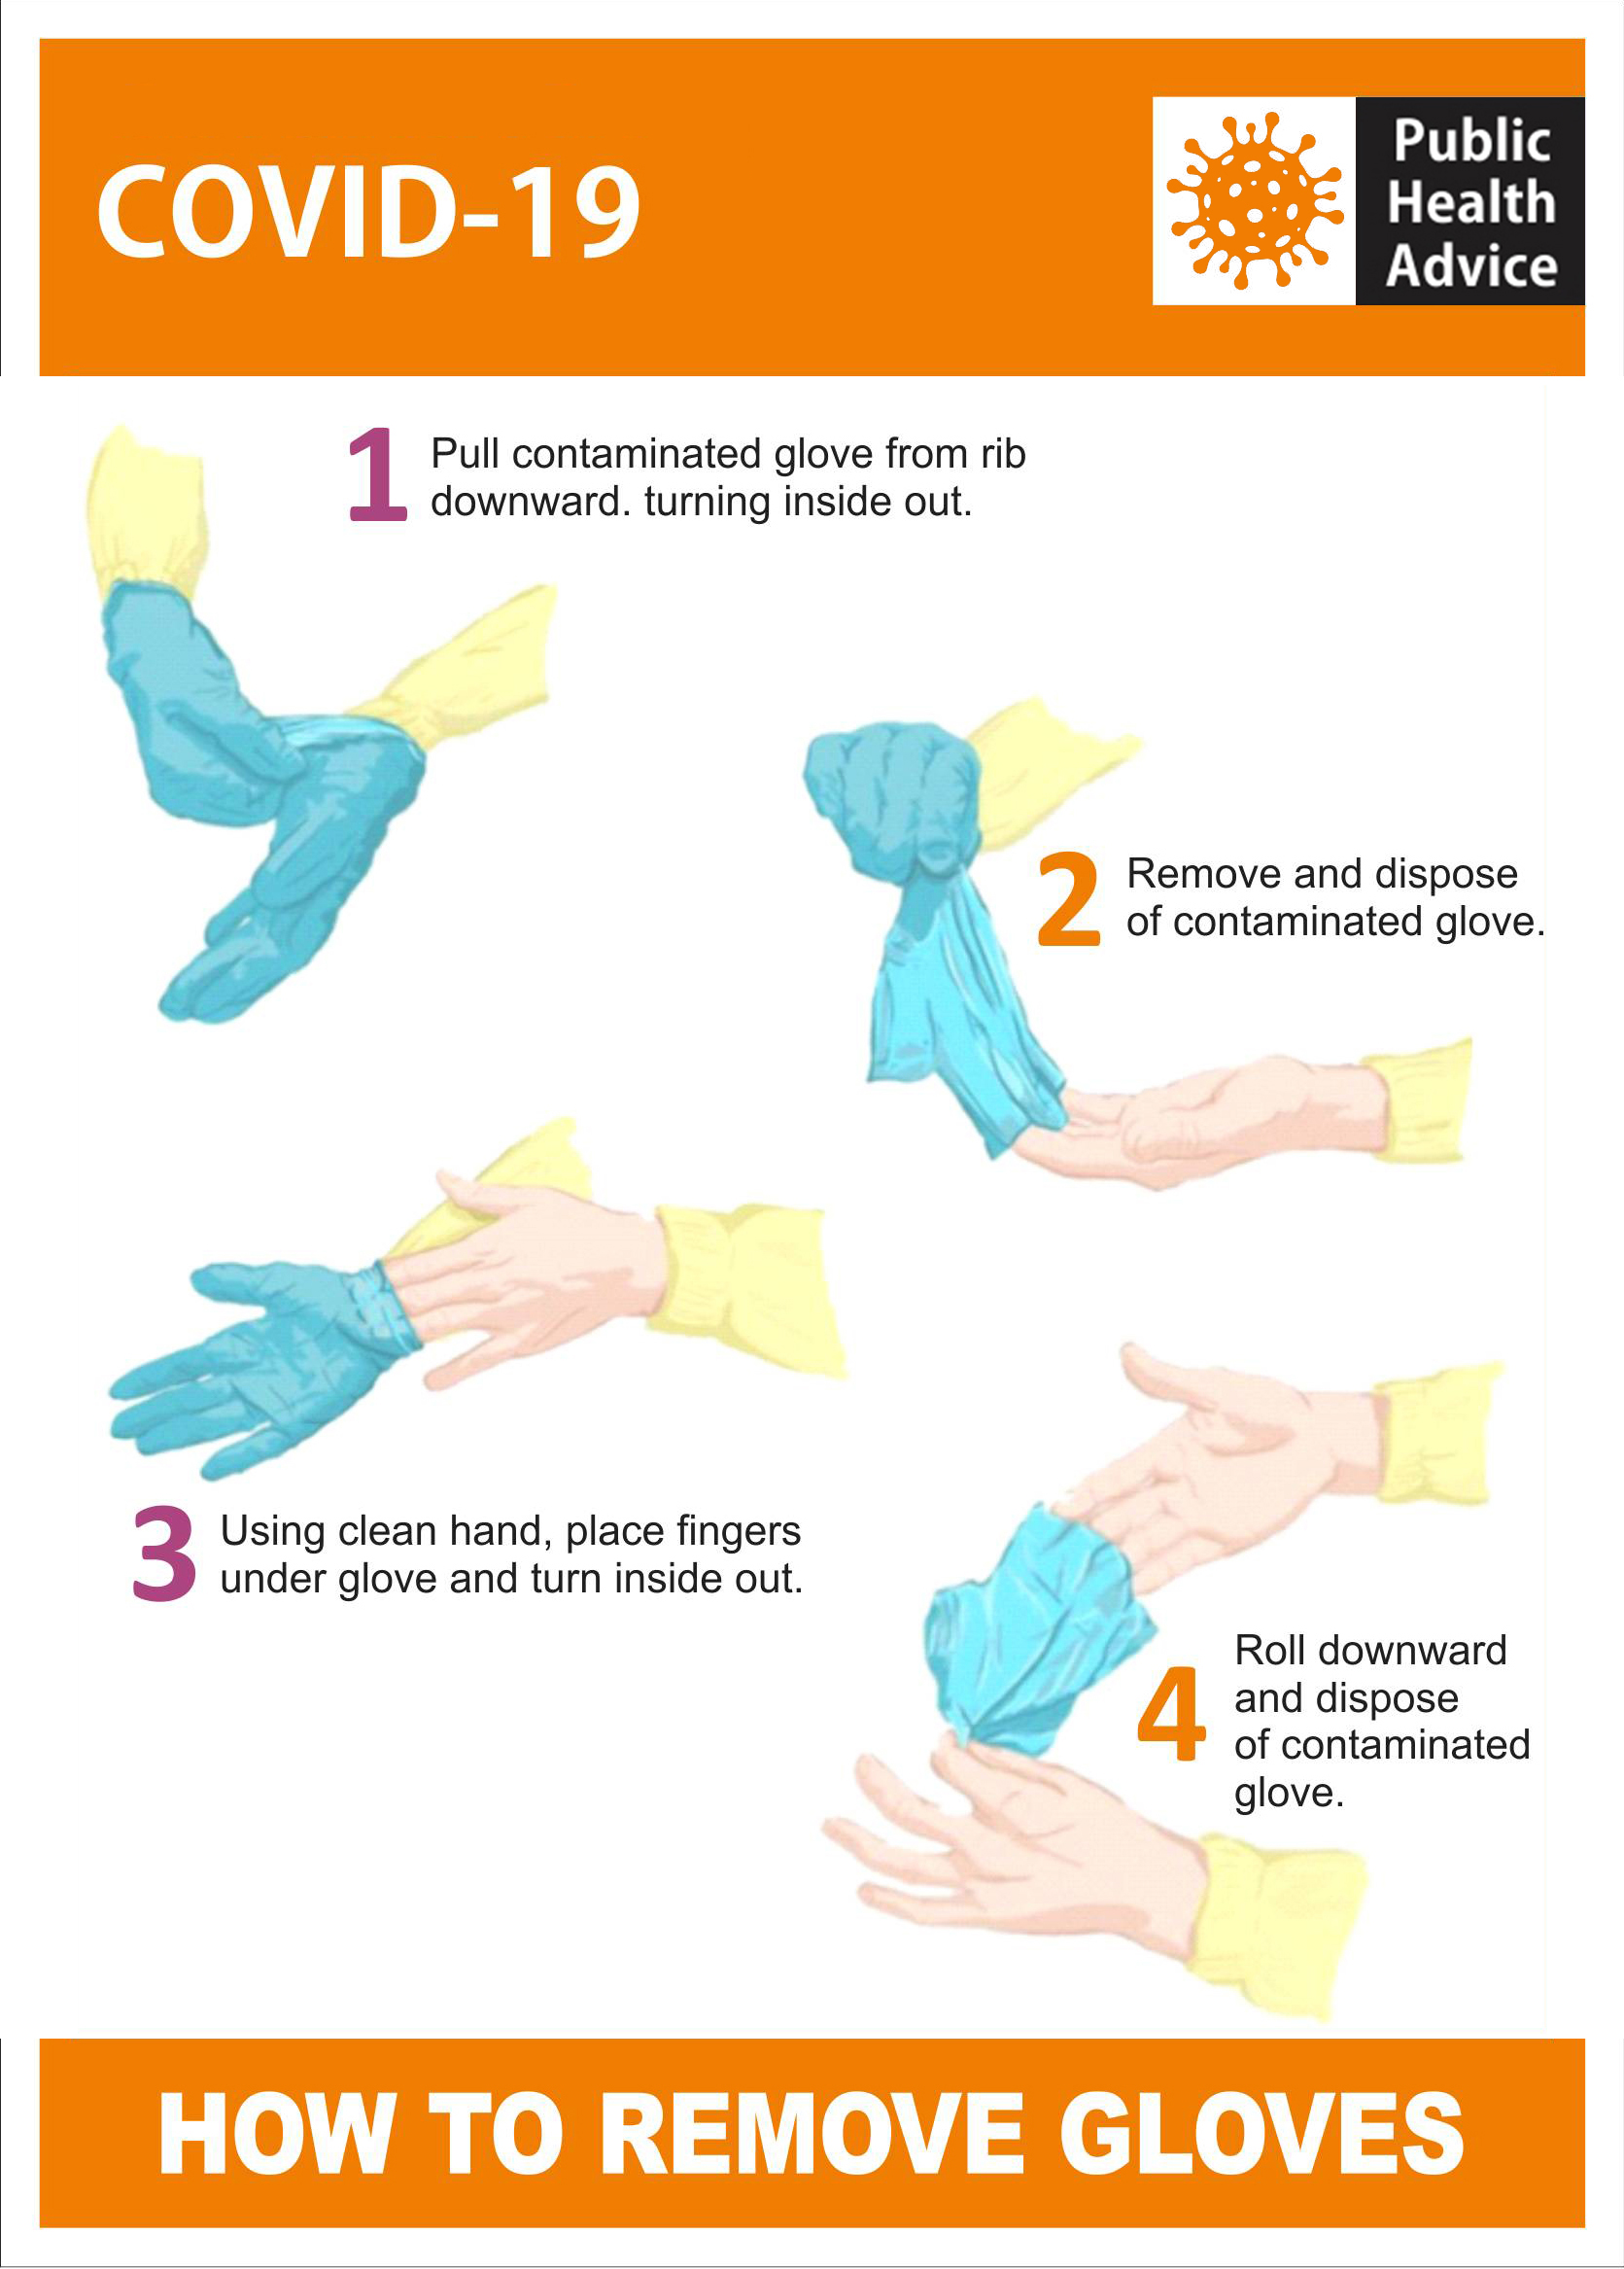 HOW TO REMOVE GLOVES